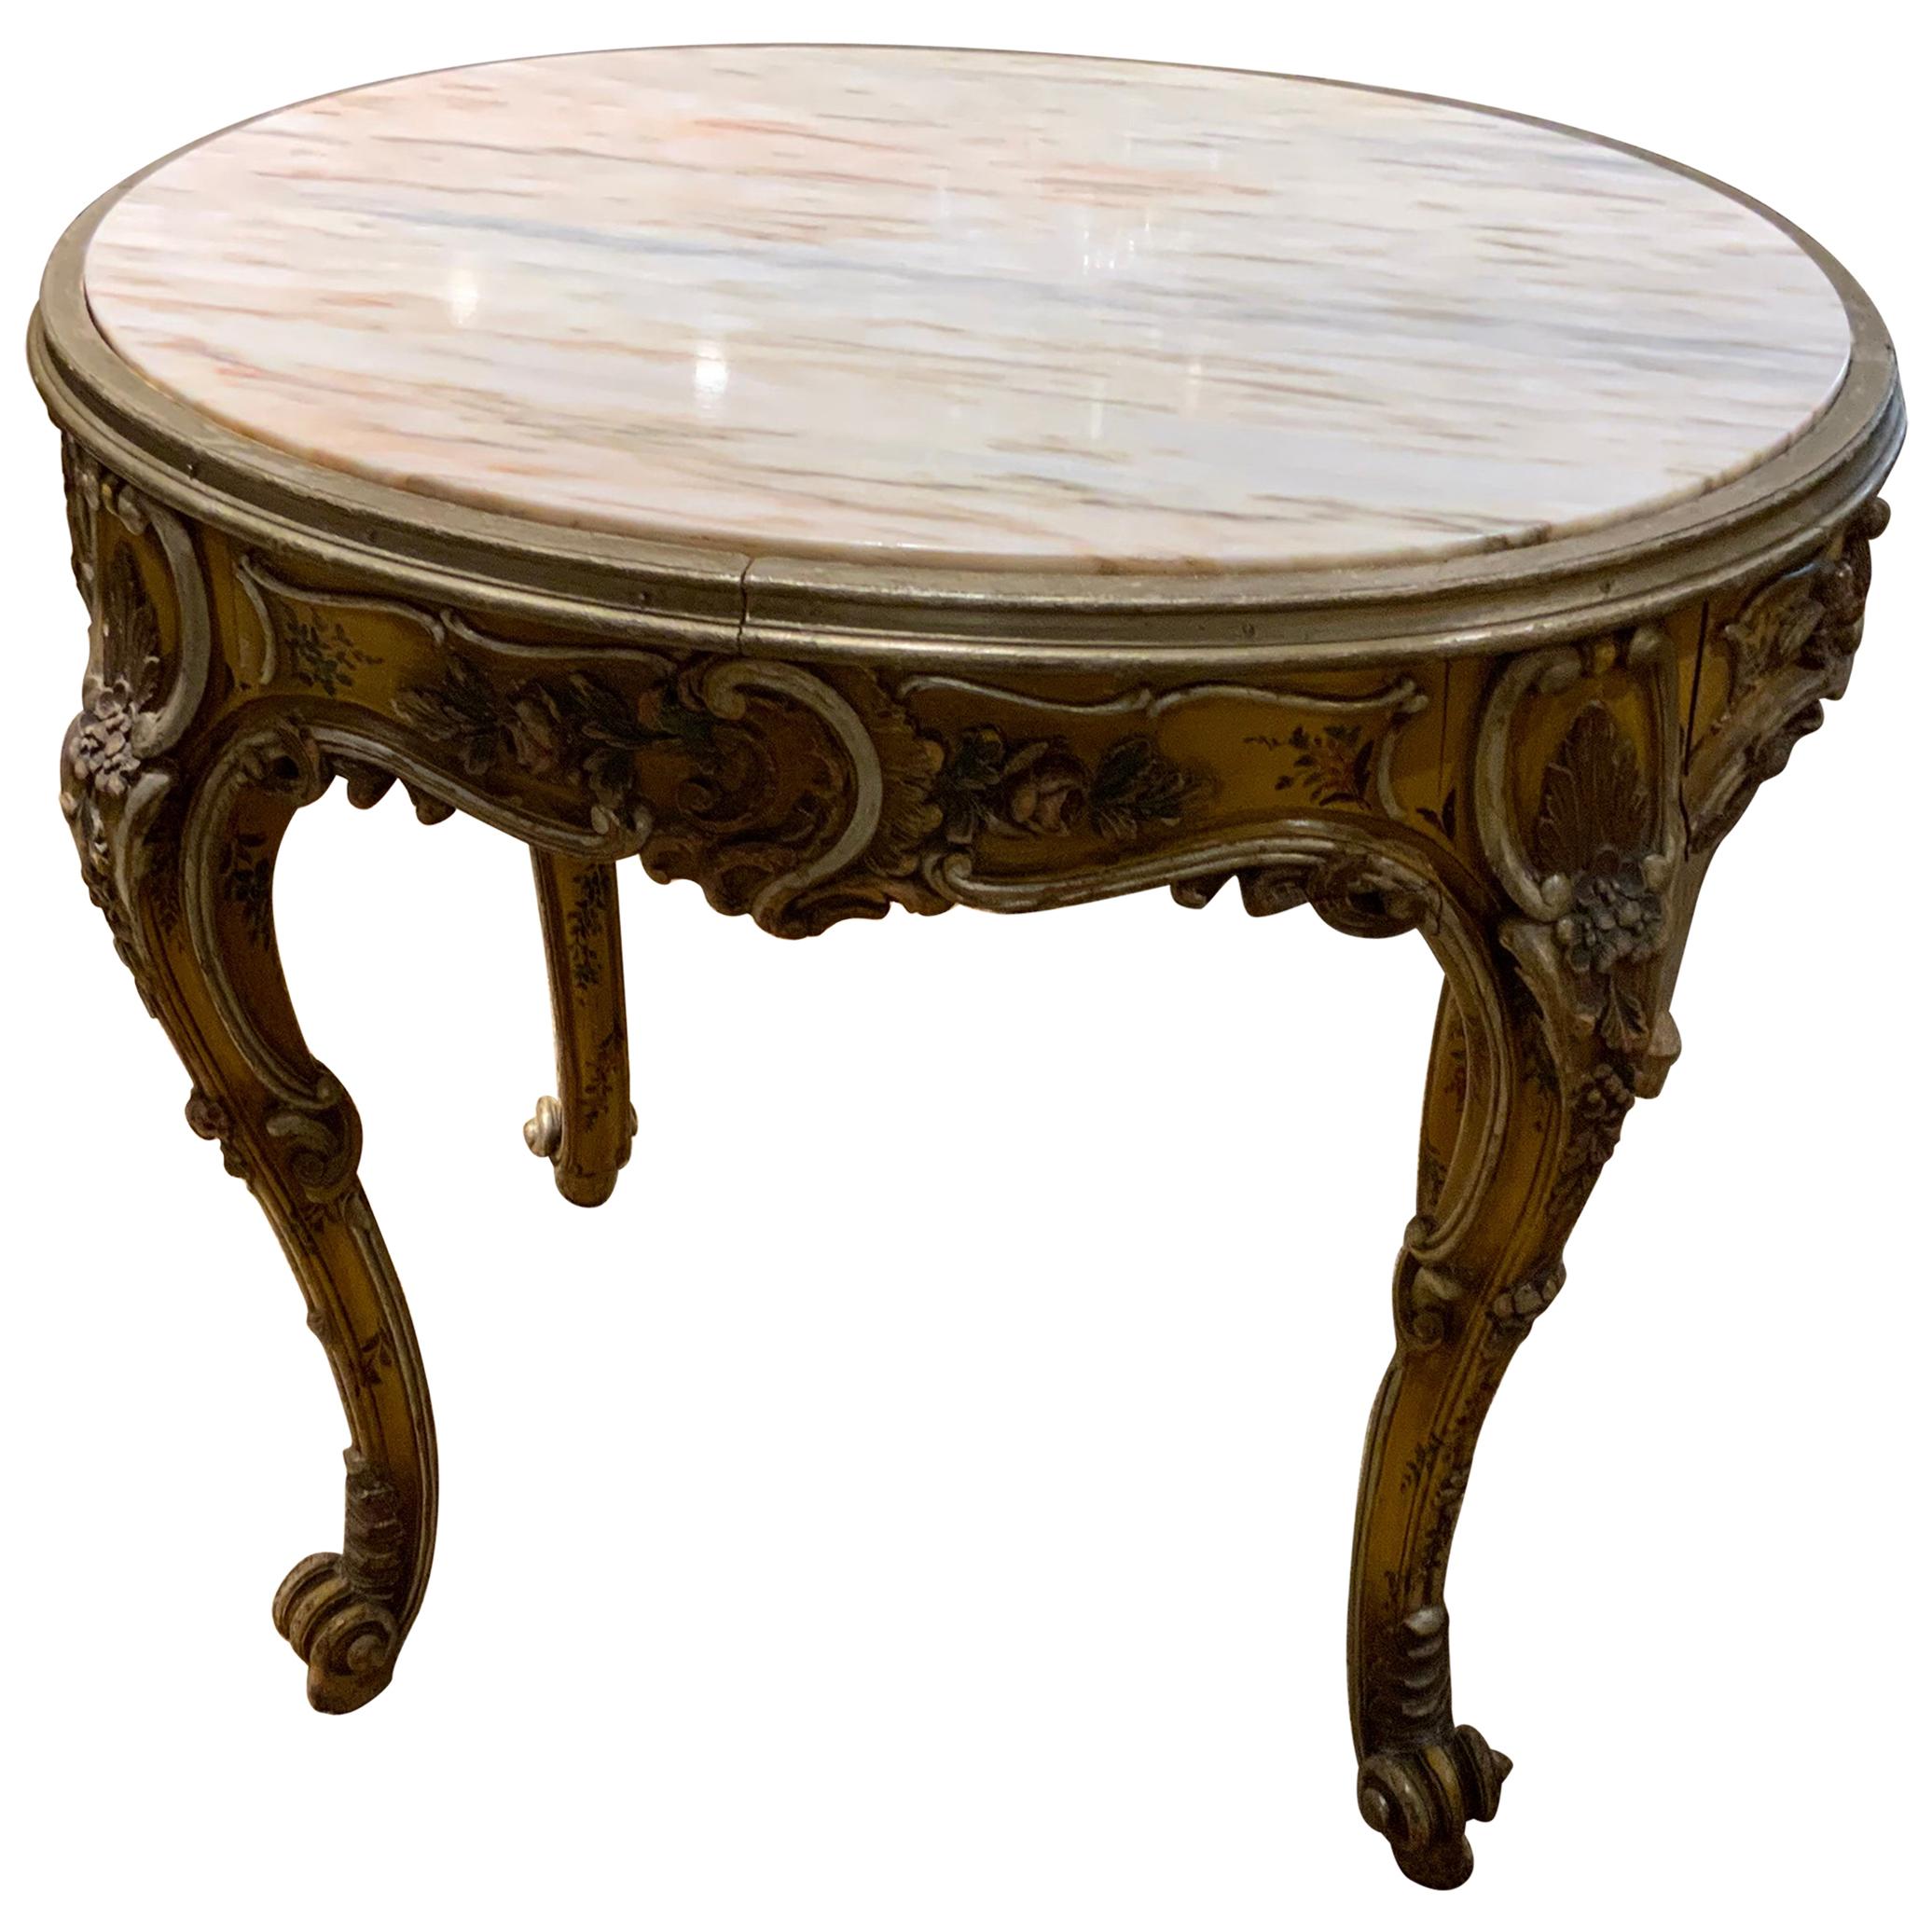 Oval Venetian Carved and Polychrome Table with a Cream, Gold and Pale Gray Veins For Sale